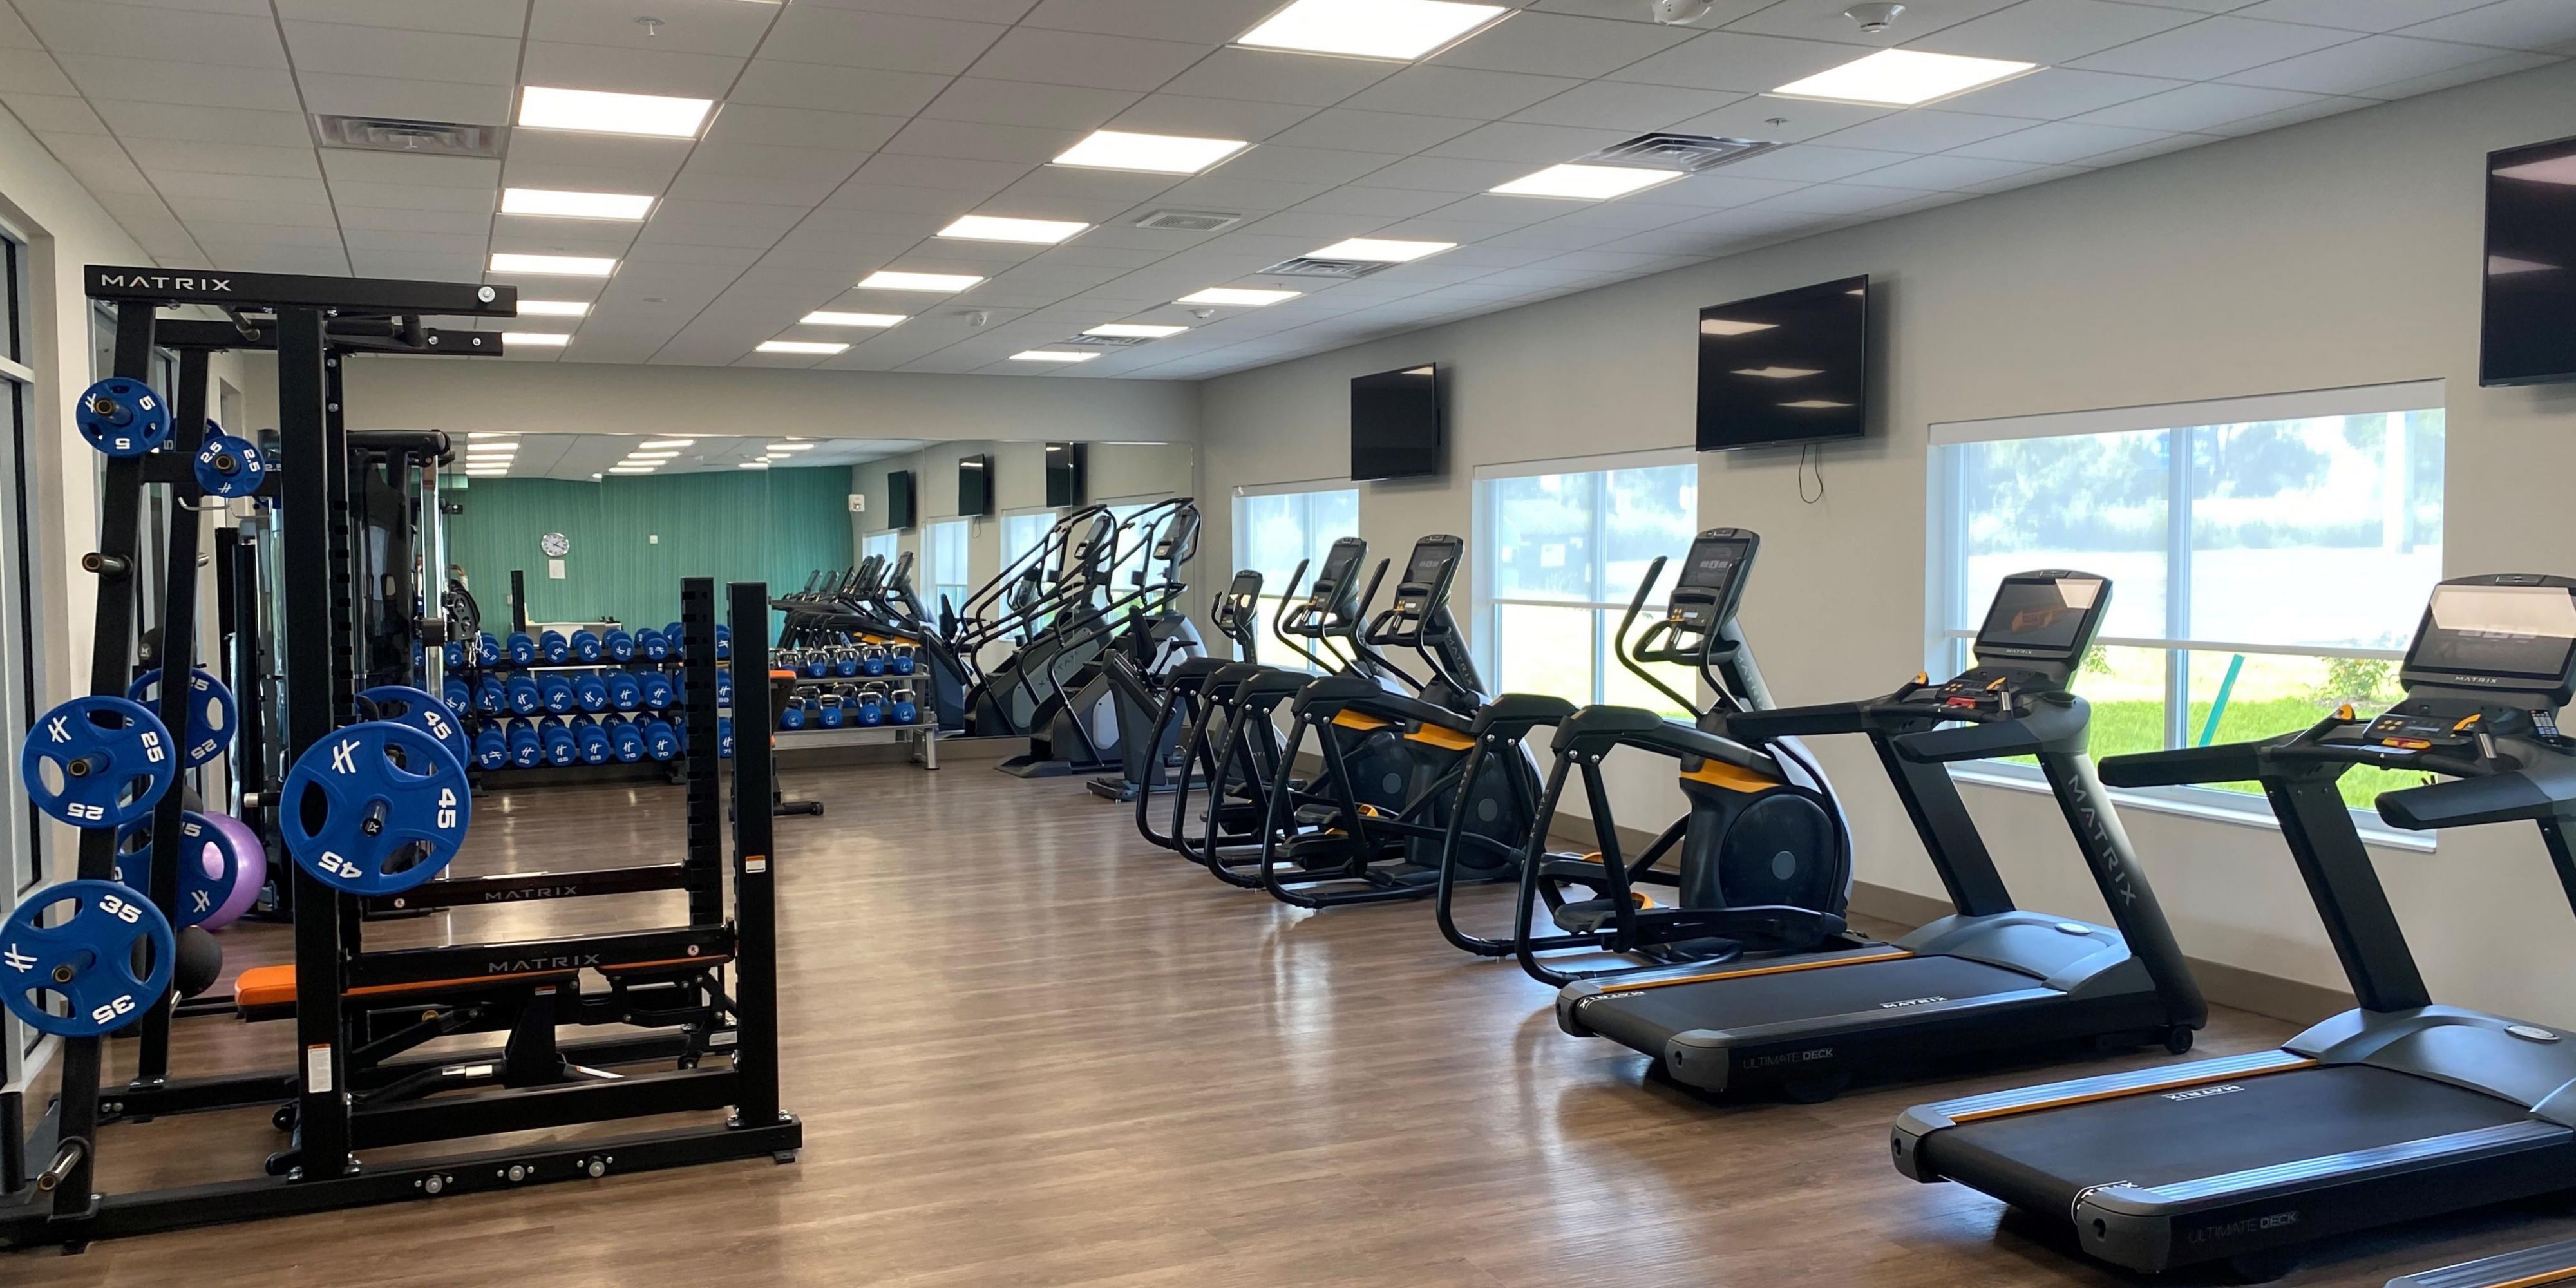 Don't skip your workout while you're traveling. Take advantage of our expanded state of the art fitness center.